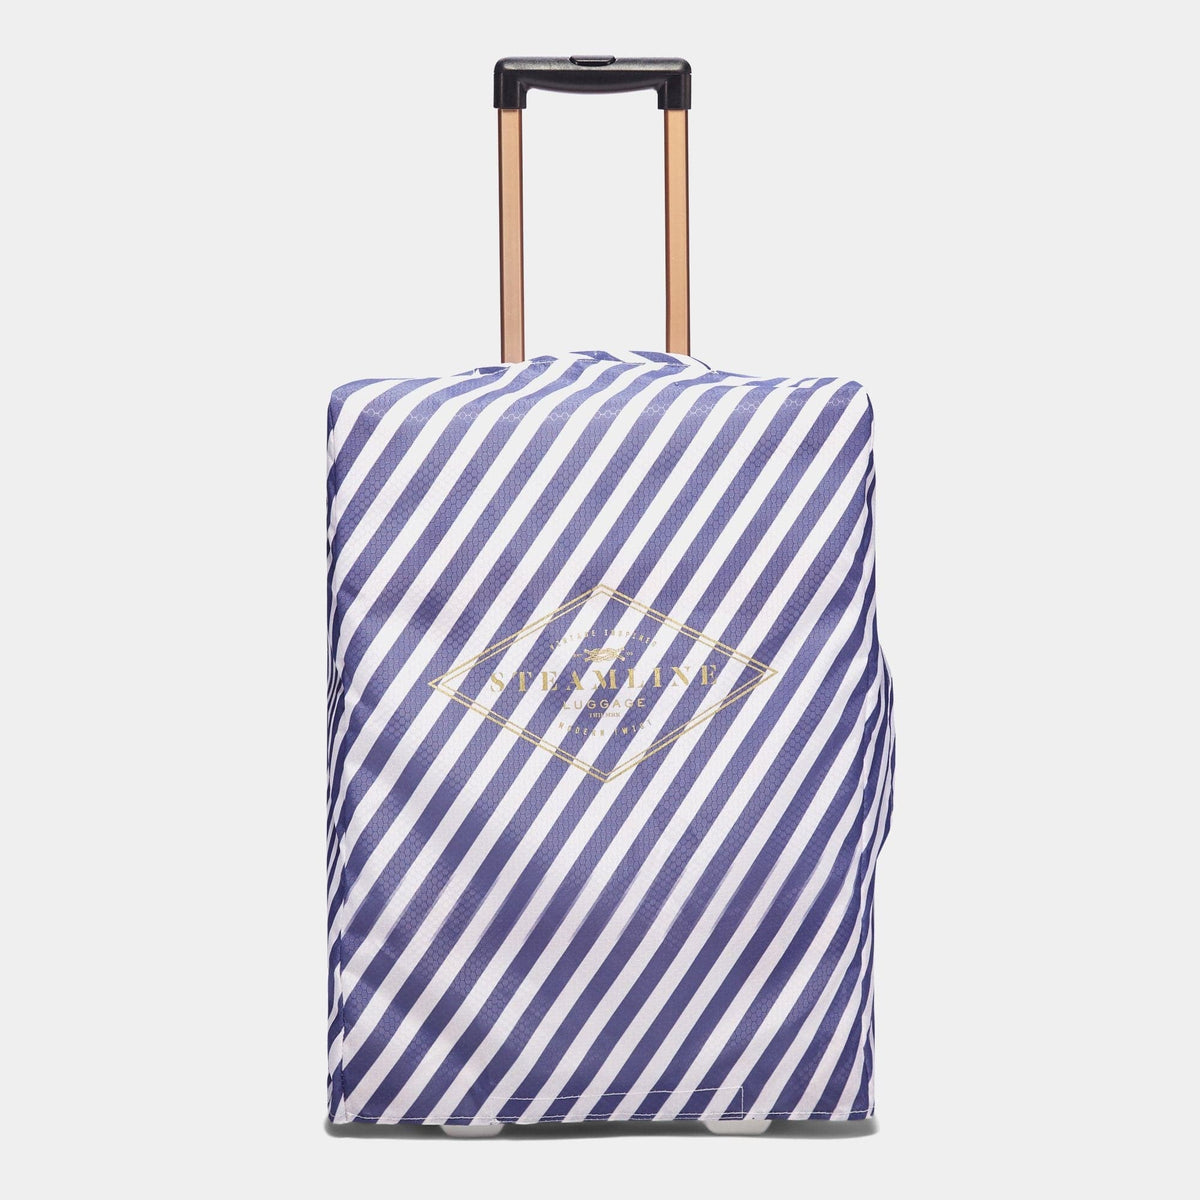 The Signature Stripe Protective Cover - Carryon Size Protective Cover Steamline Luggage 